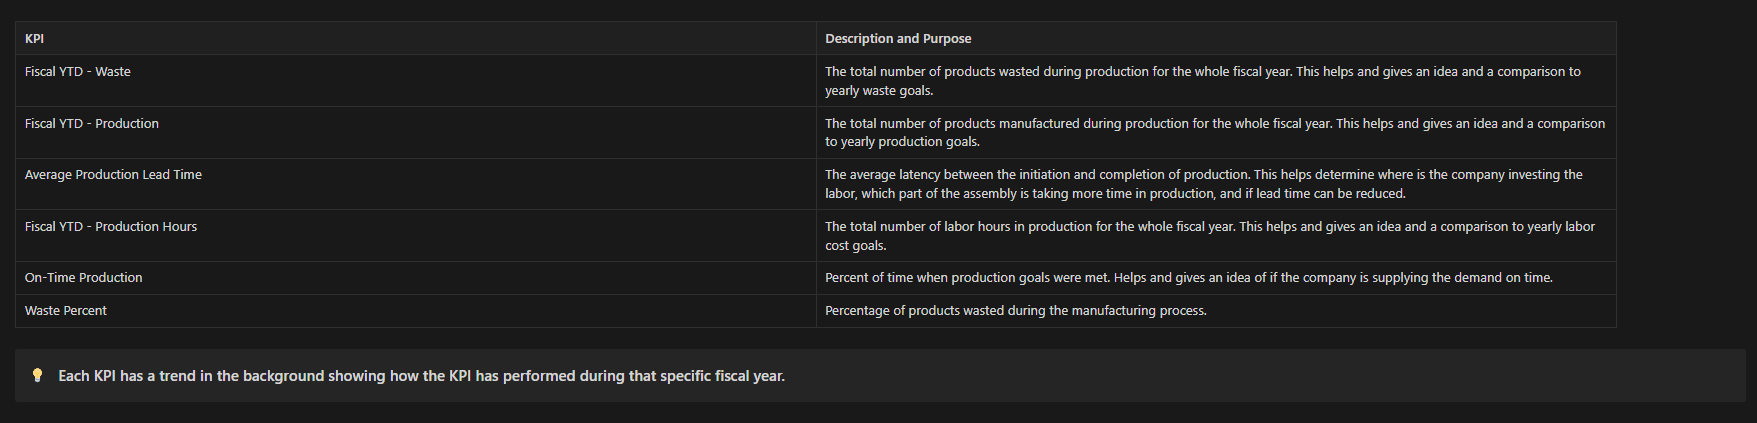 Production Overview KPI